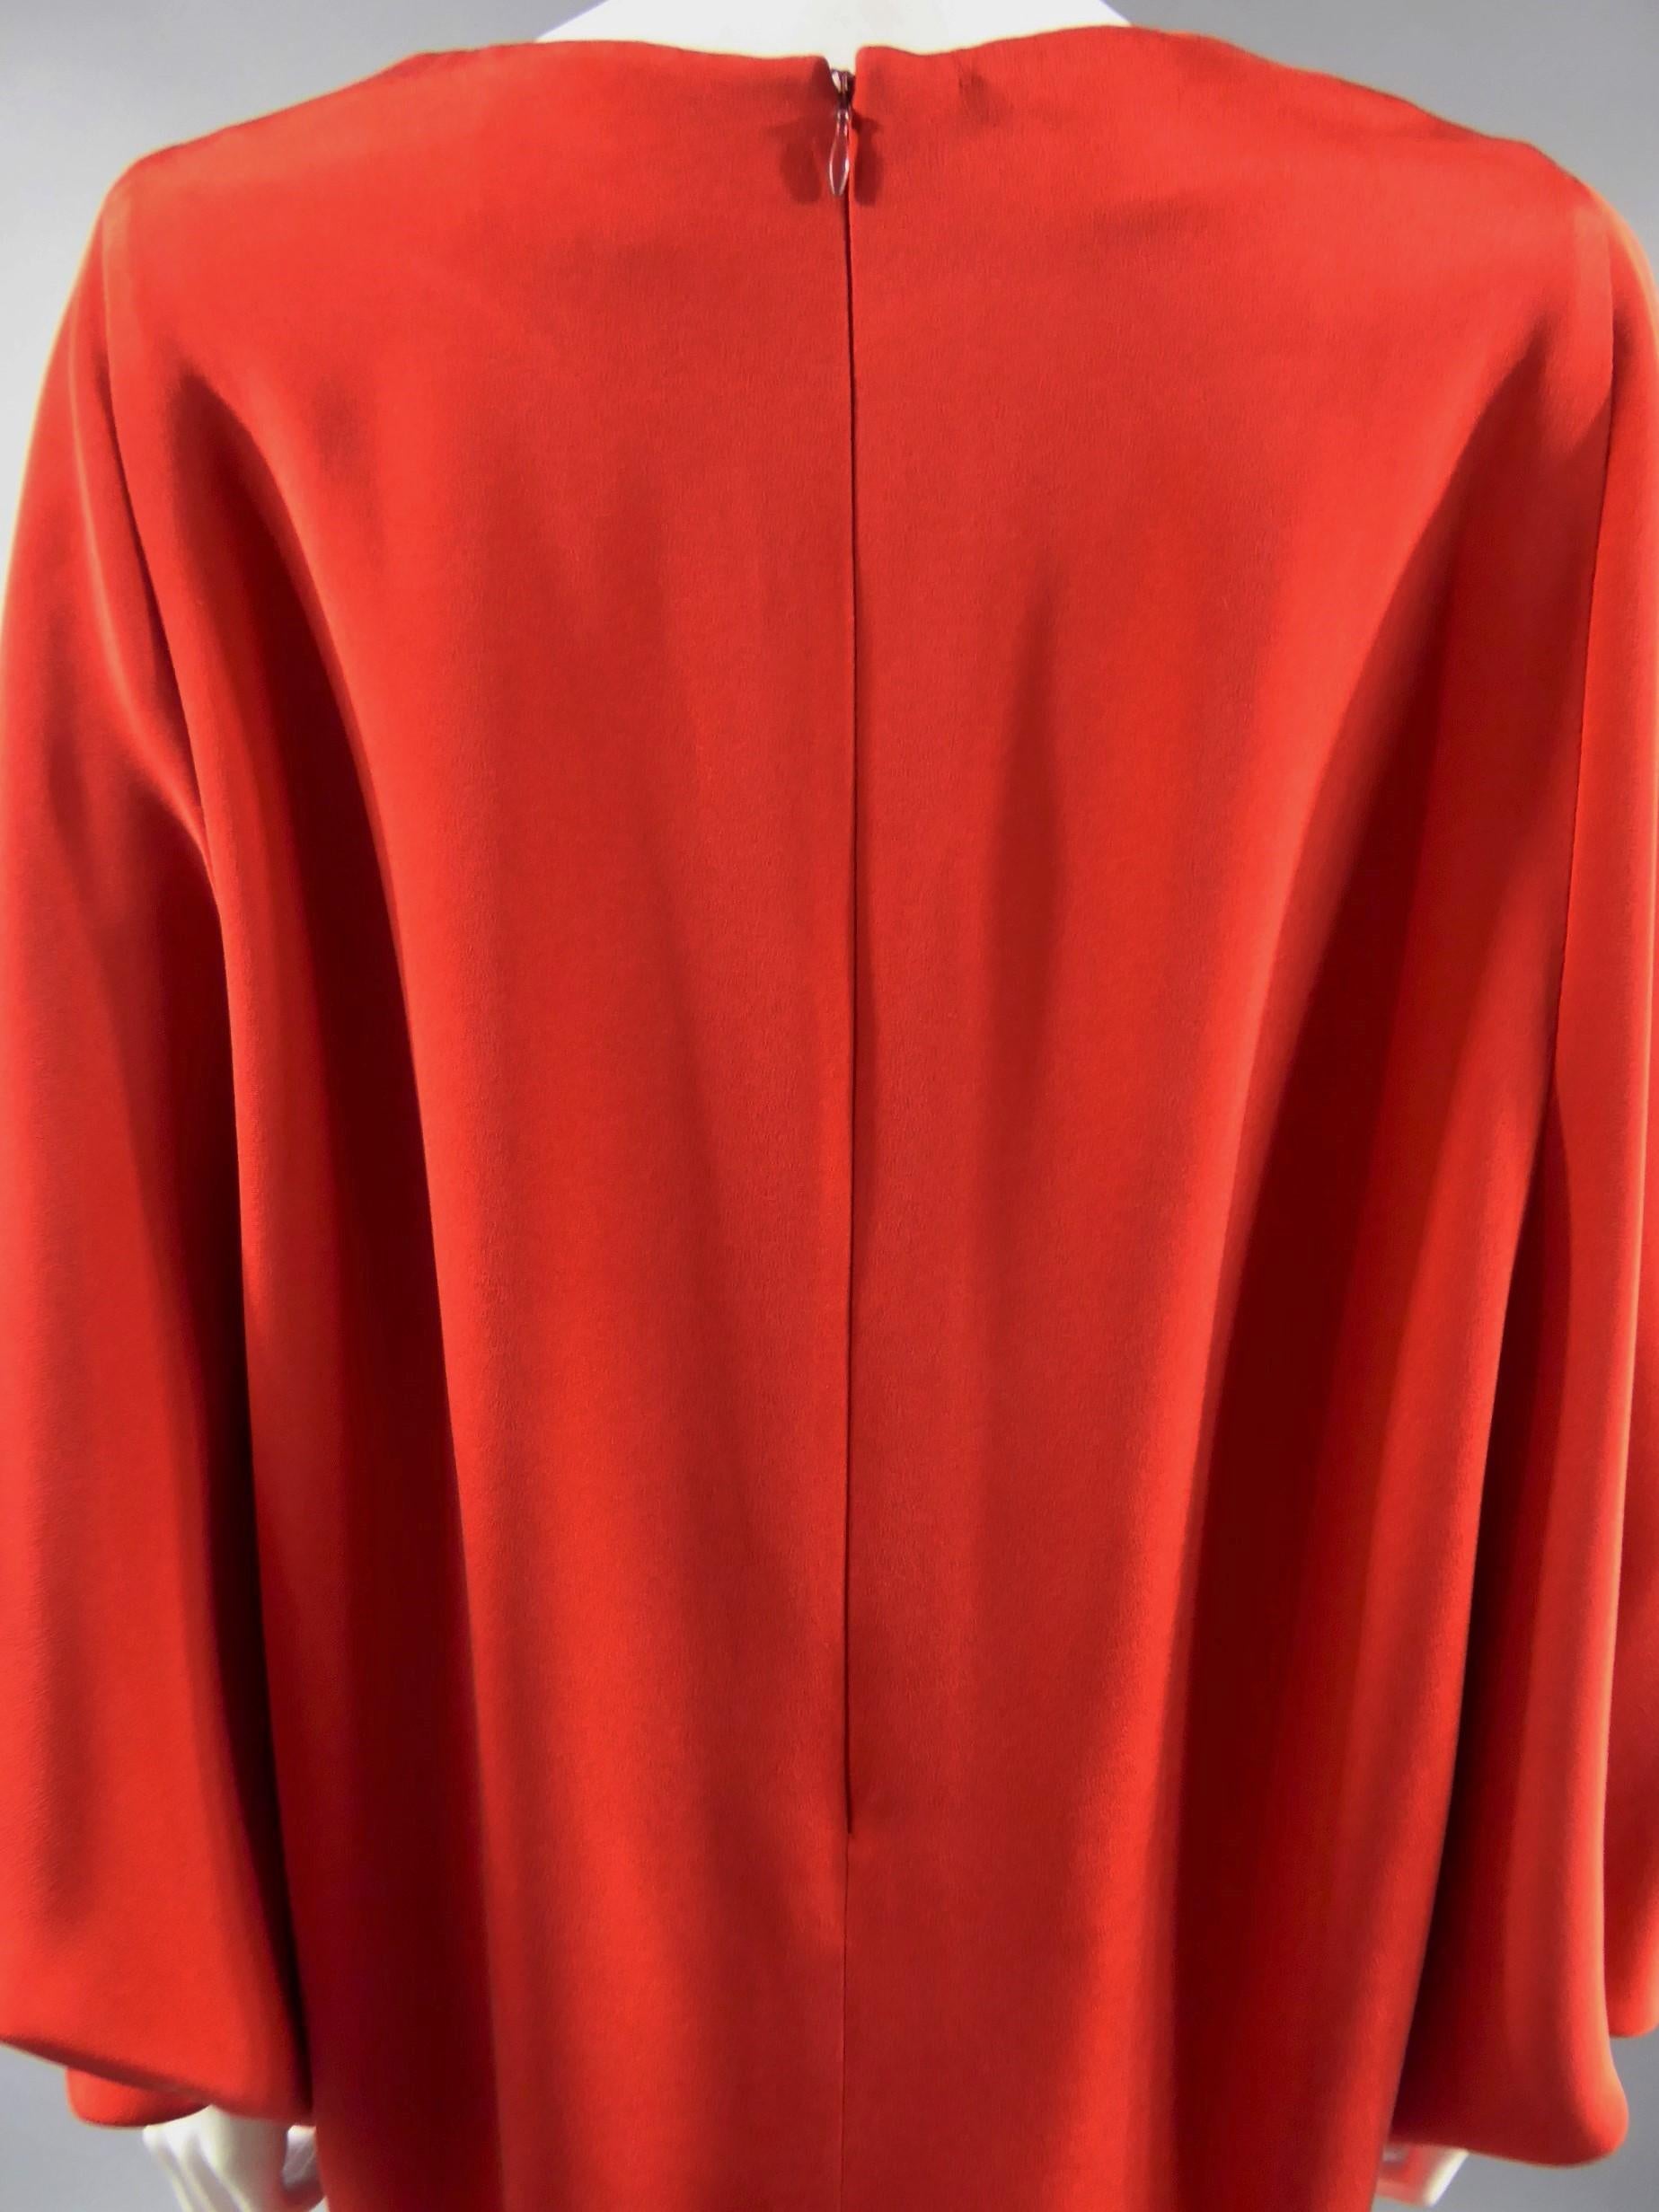 A Pierre Cardin Couture Batwing Sleeves Dress & Skirt Circa 1980 For Sale 4